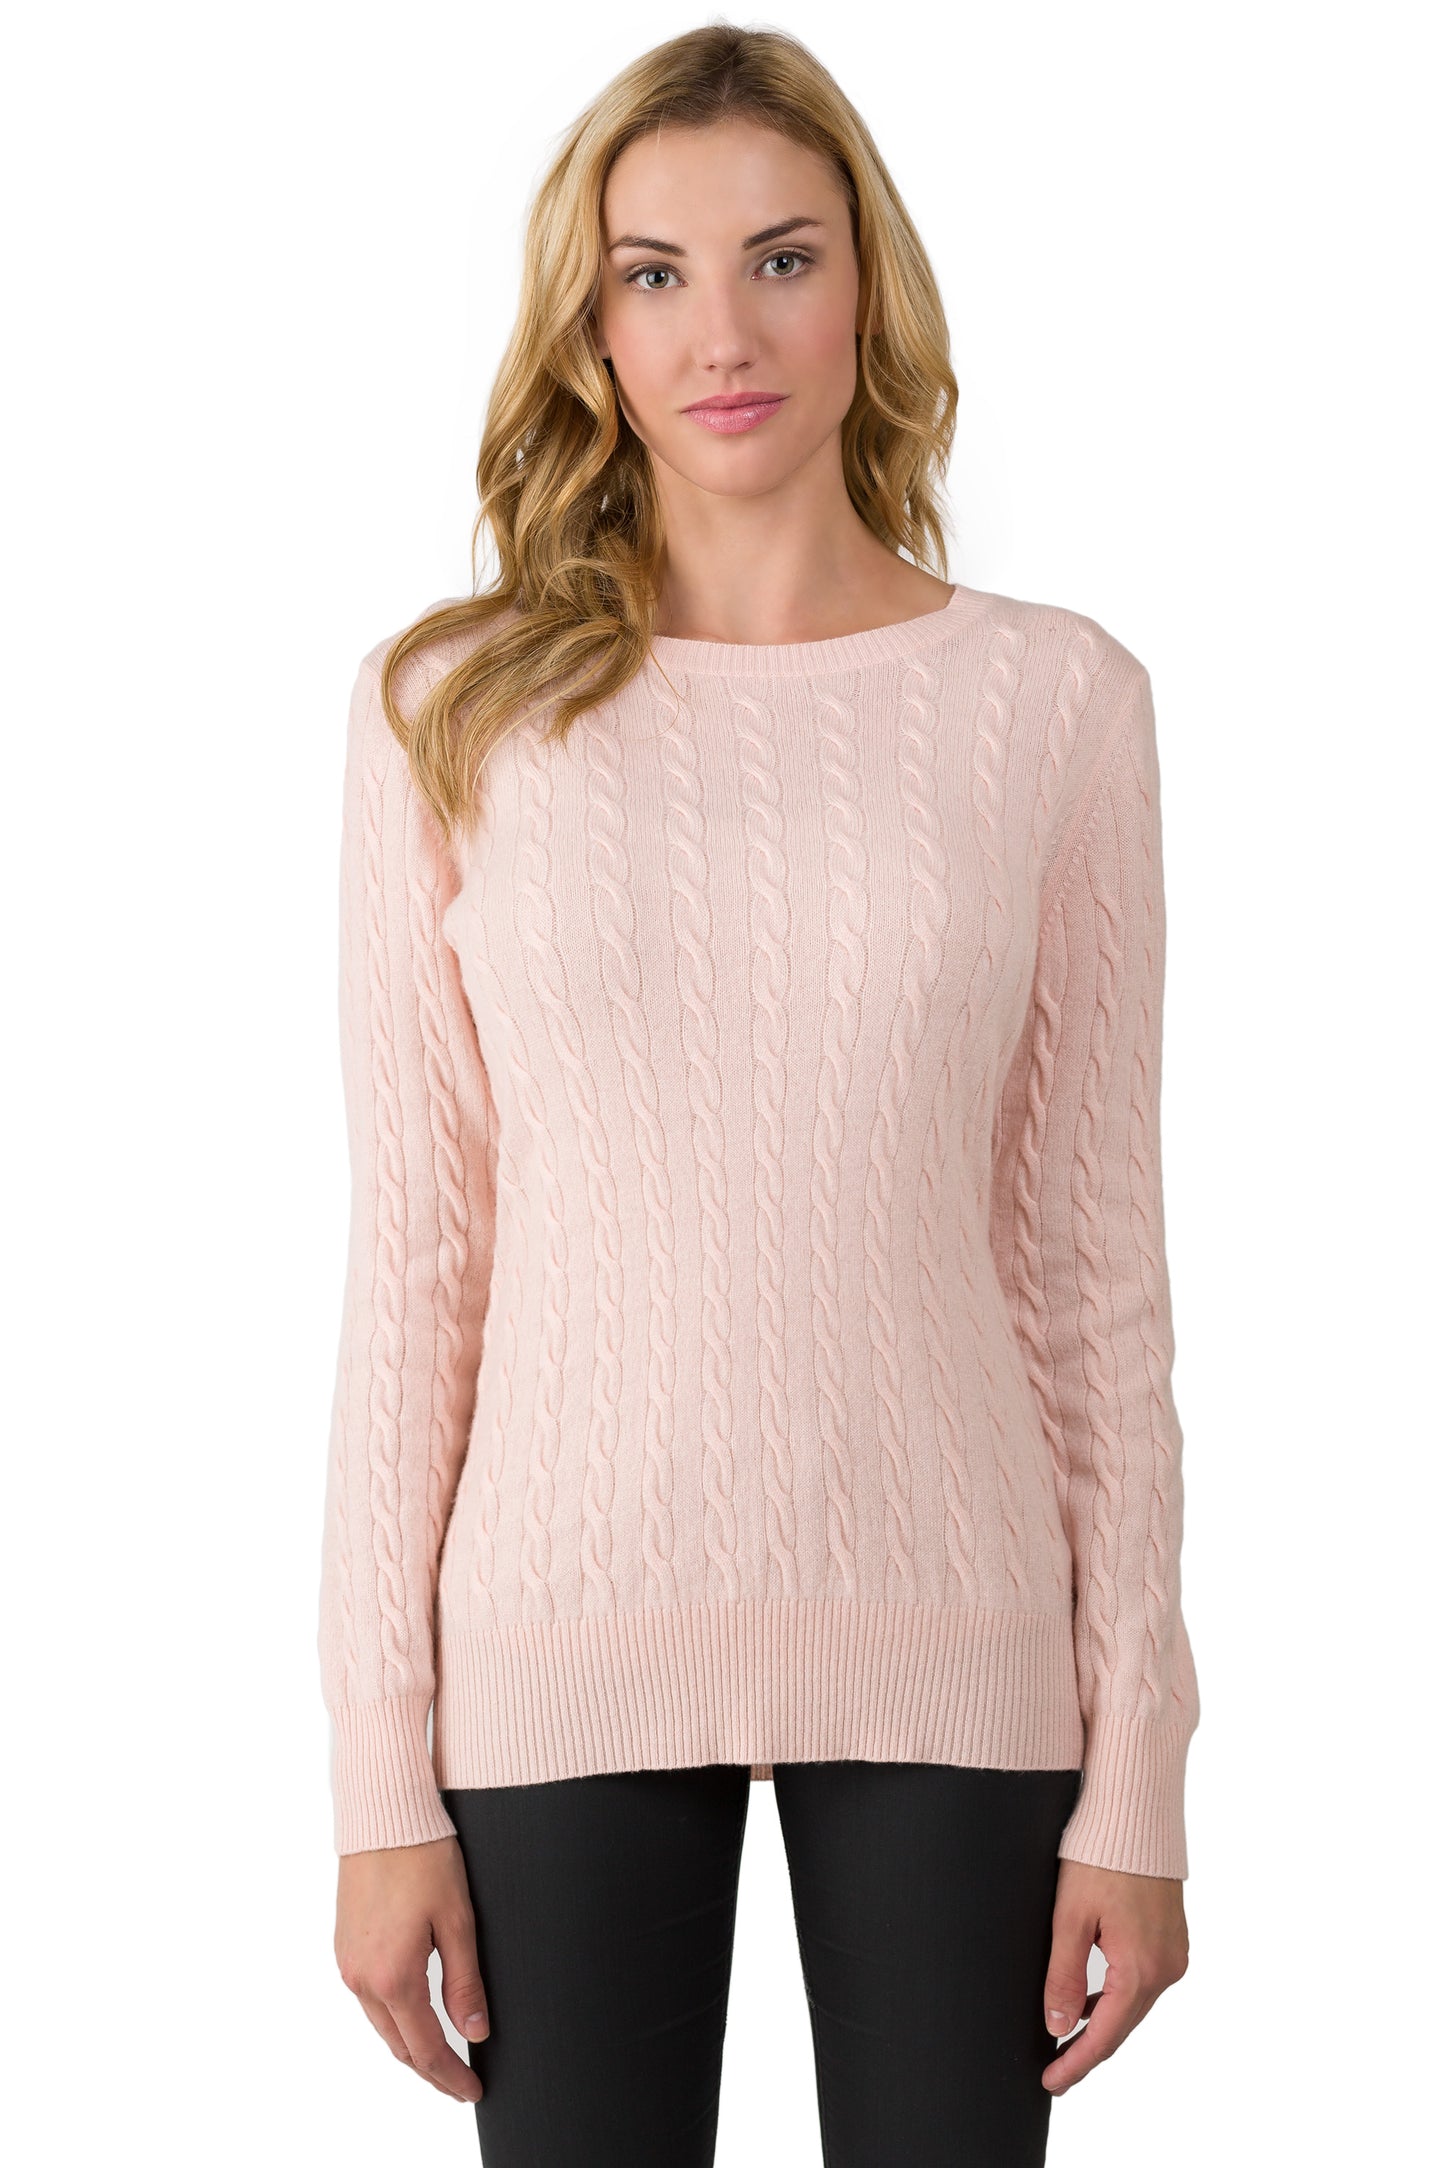 J CASHMERE Women's 100% Cashmere Long Sleeve Cable-knit Pullover Crew Neck Sweater